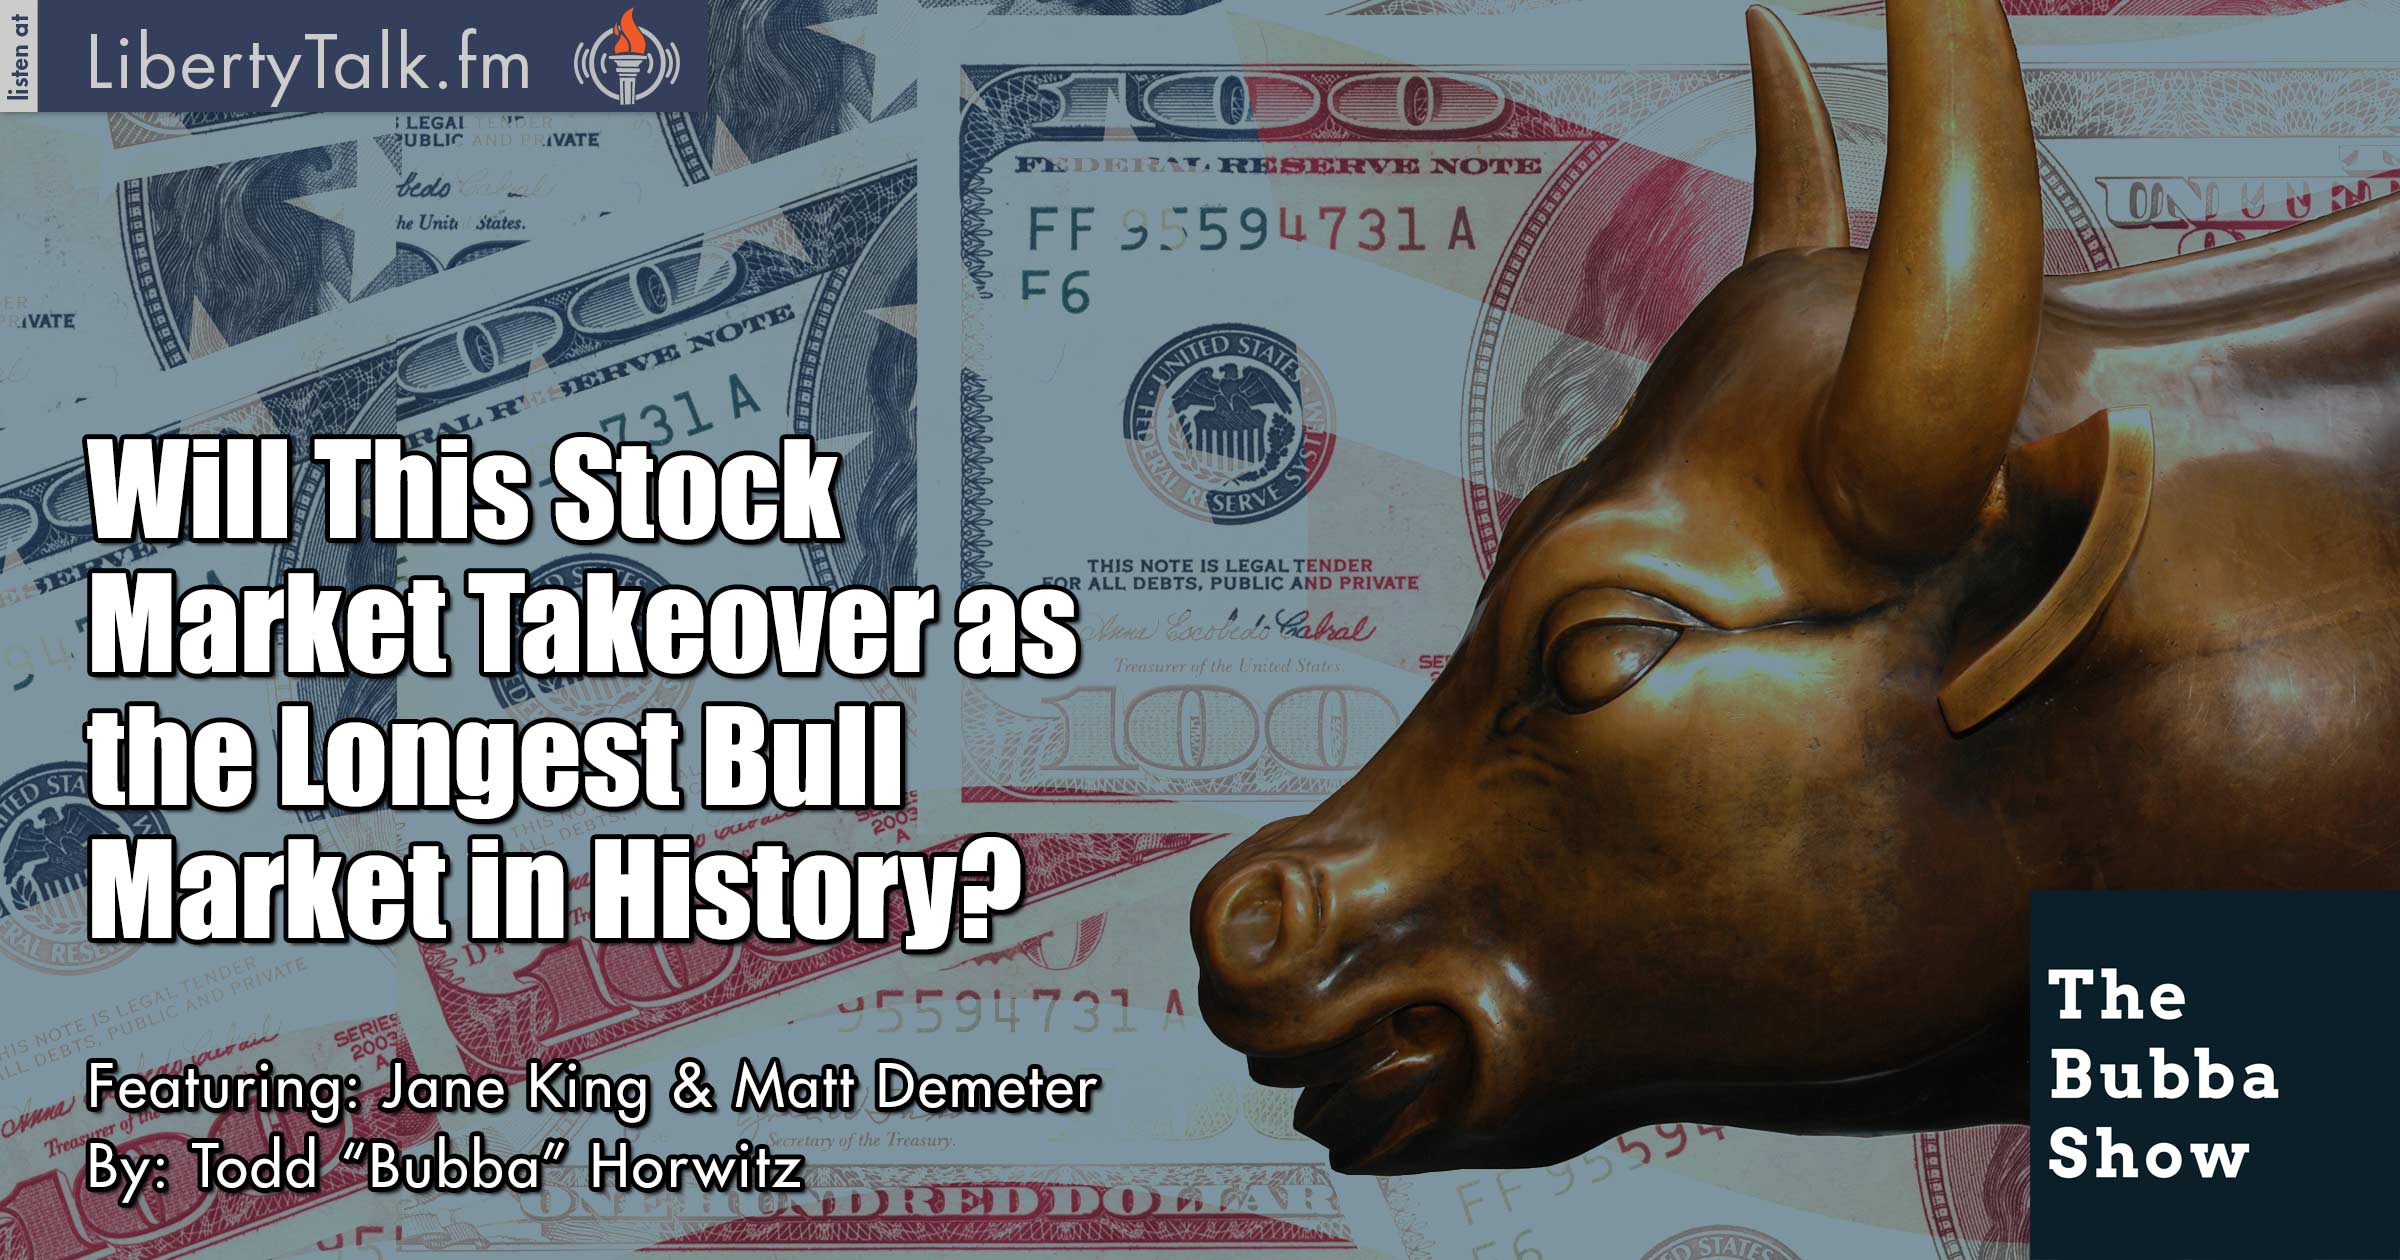 Will This Stock Market Takeover as the Longest Bull Market in History? - The Bubba Show